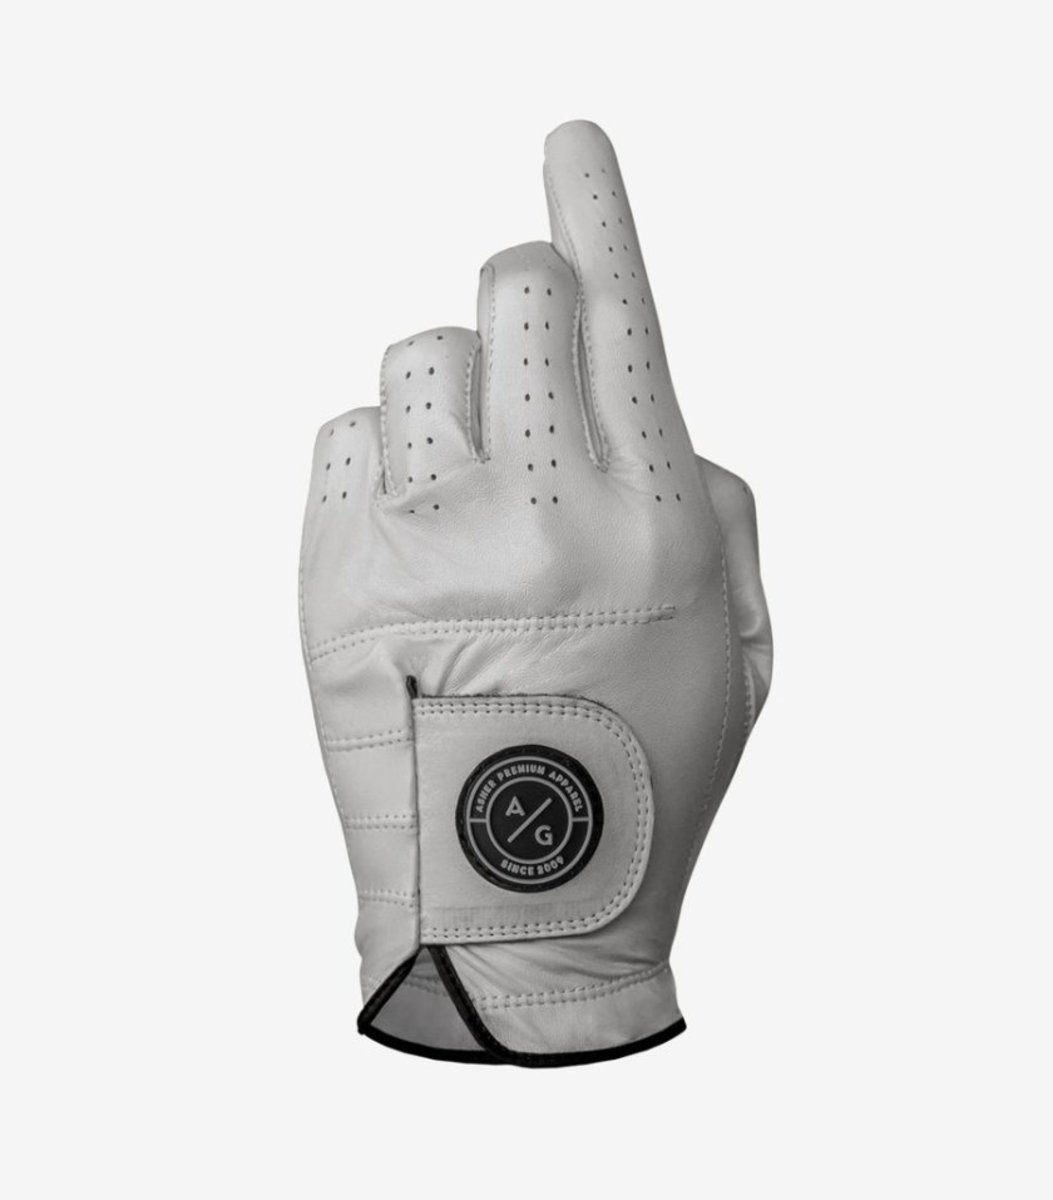 Asher Golf's Premium Collection Glove in nimbus colorway. 